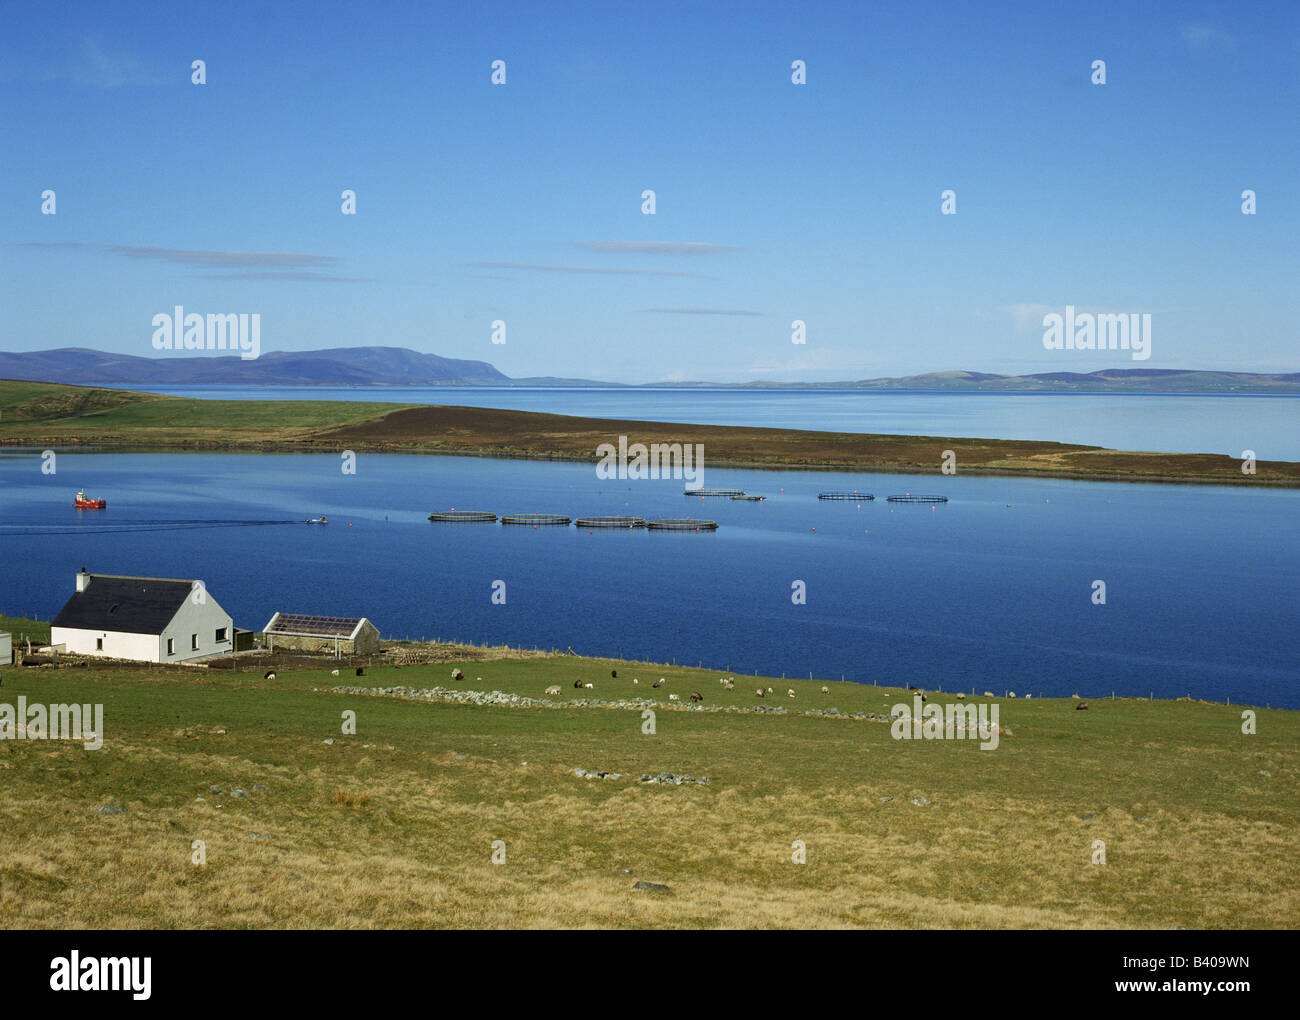 dh Norquay Fish Farm ORKNEY SALMON ORKNEY Hunda Fish cages Scapa Flow farming scotland rural house uk cottage by sea scottish islands Stock Photo